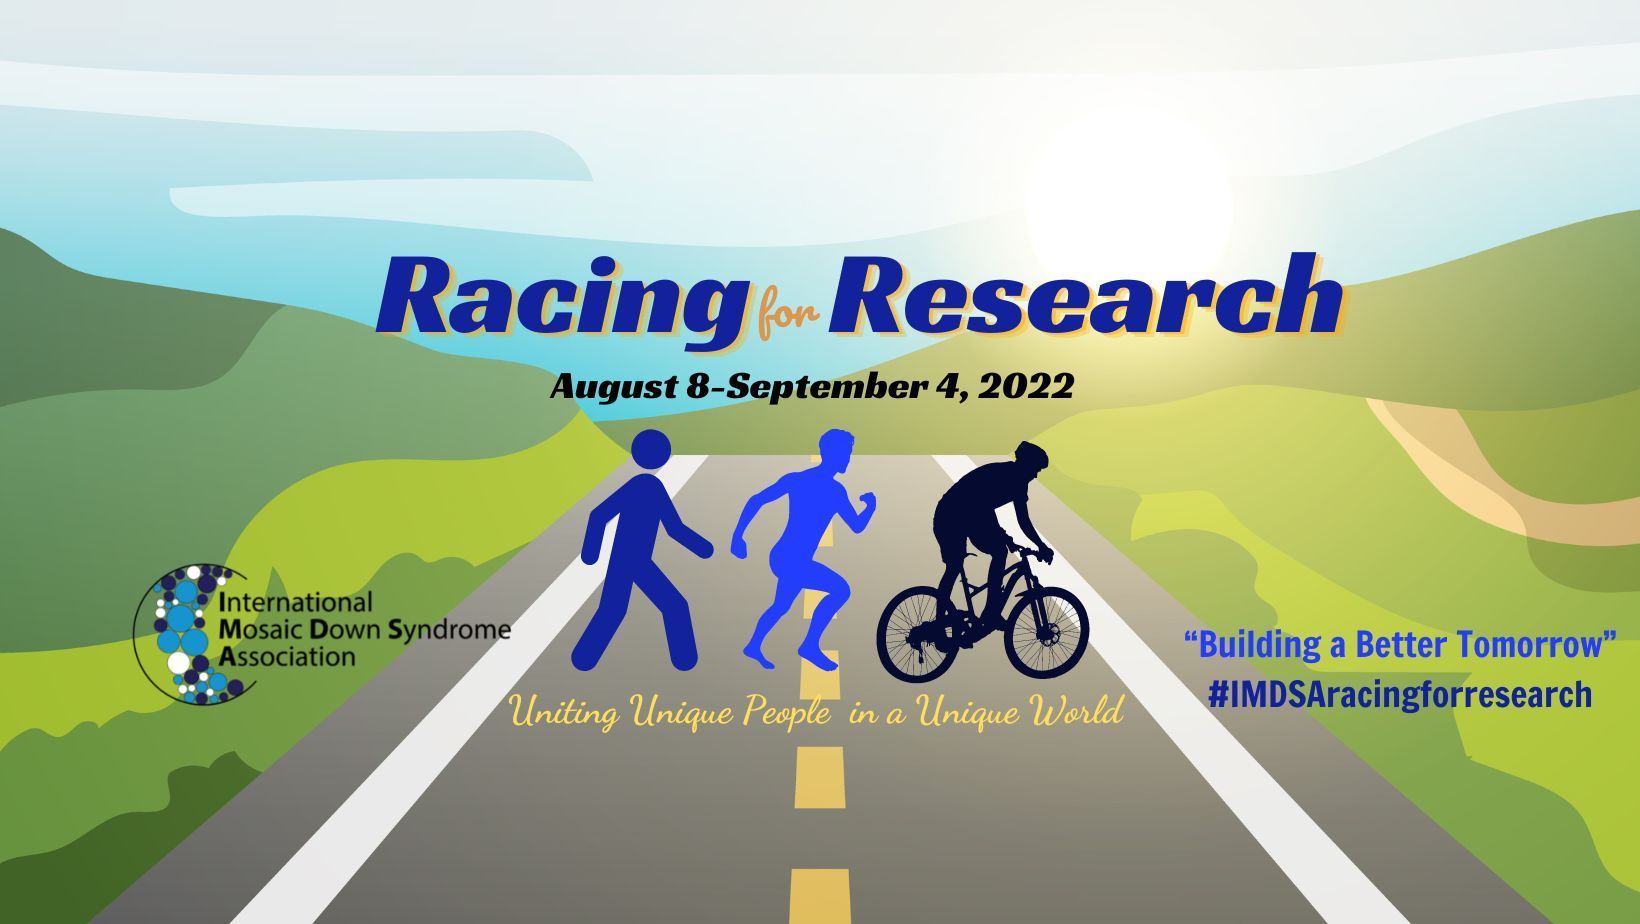 18-intriguing-facts-about-racing-for-research